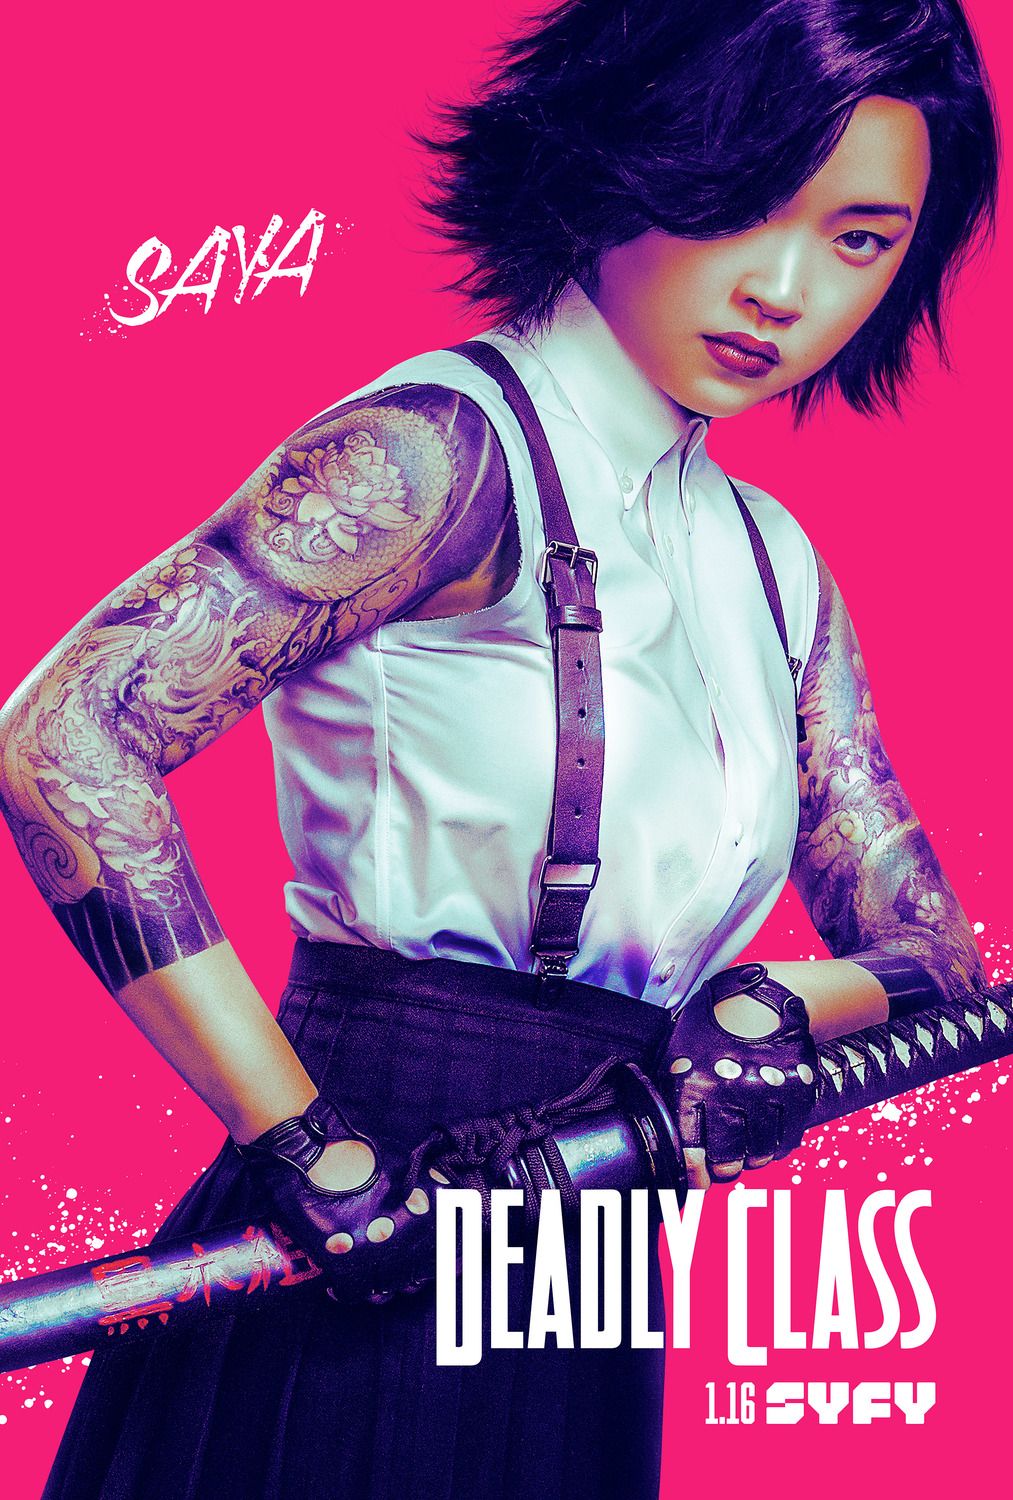 Return to the main poster page for Deadly Class 15 of 18 Lana